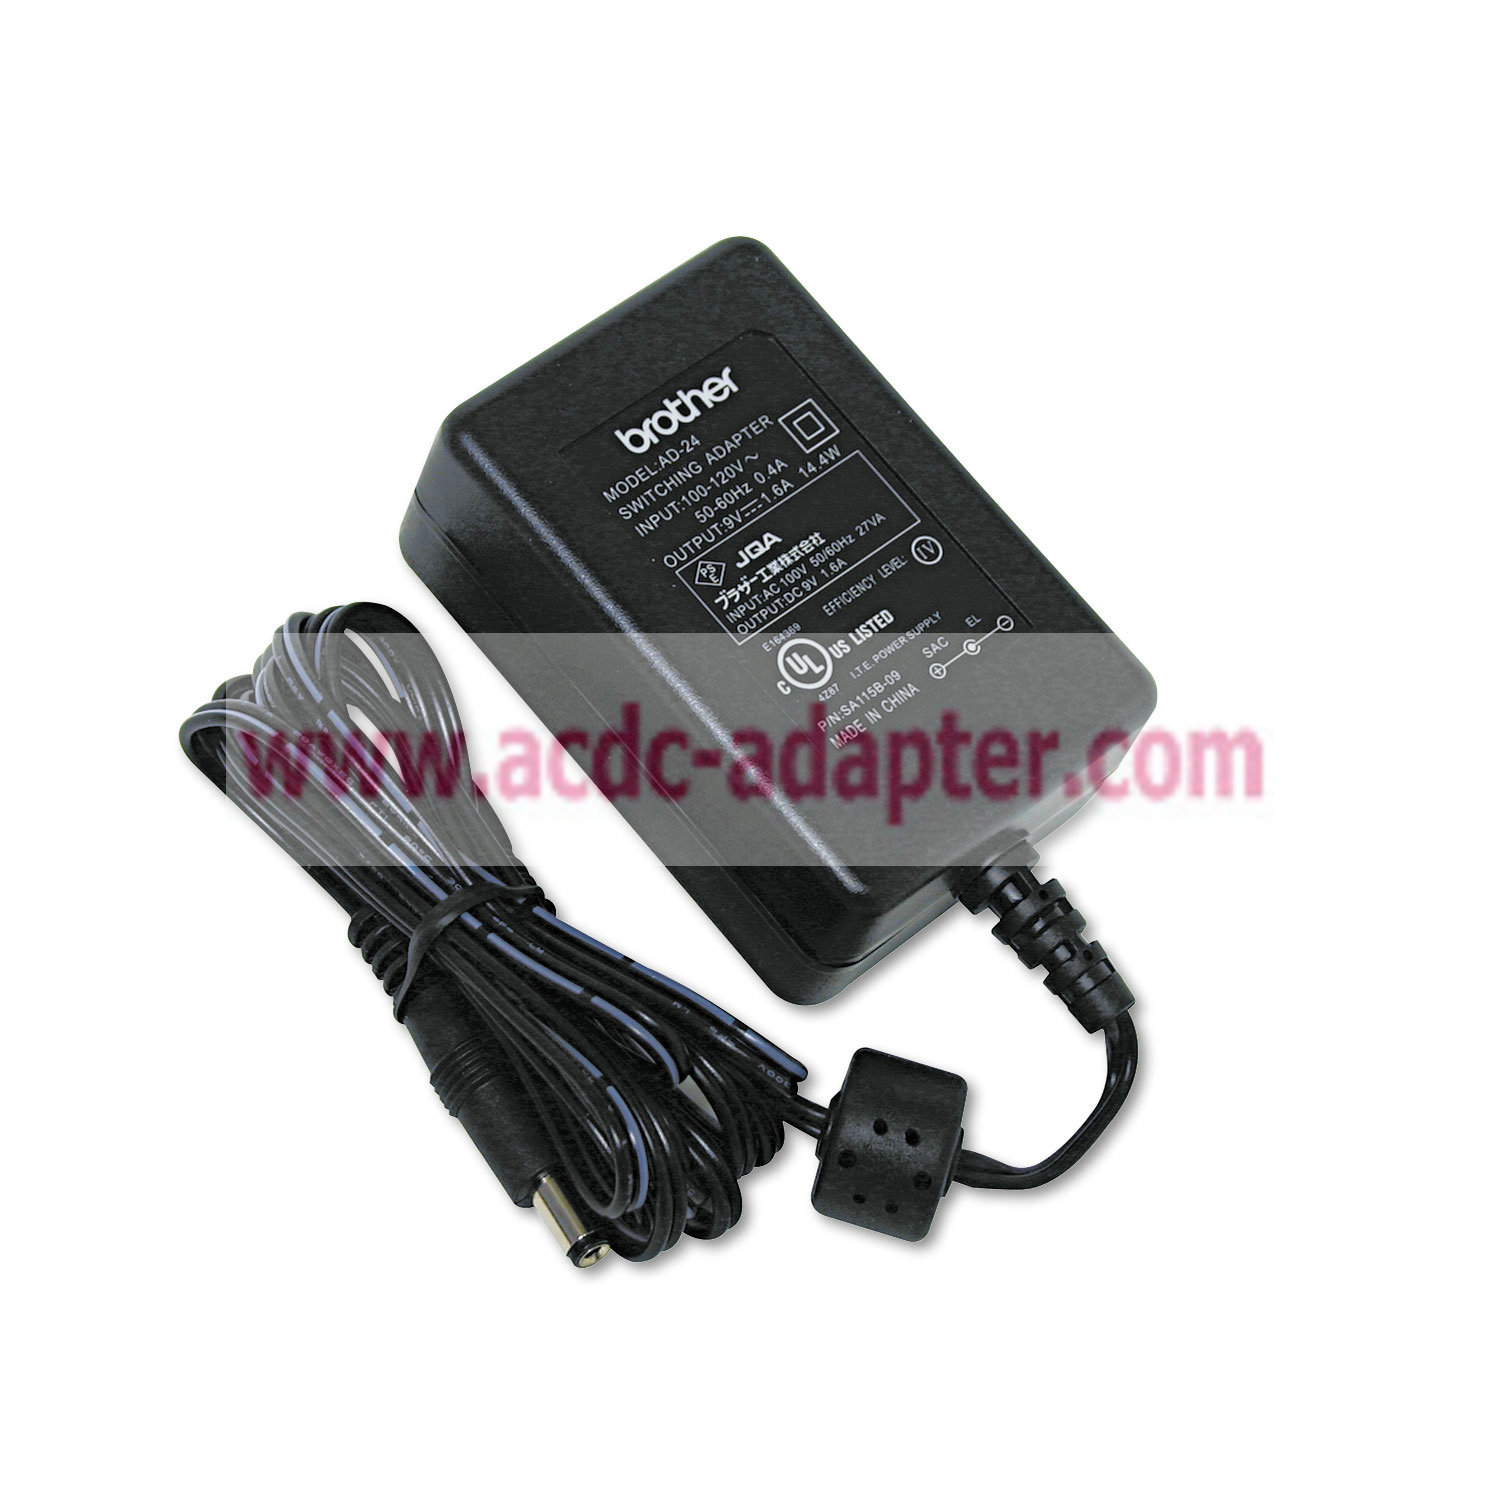 Brother P-Touch AD-24 9V 1.6A AC Adapter for Brother P-Touch Label Makers